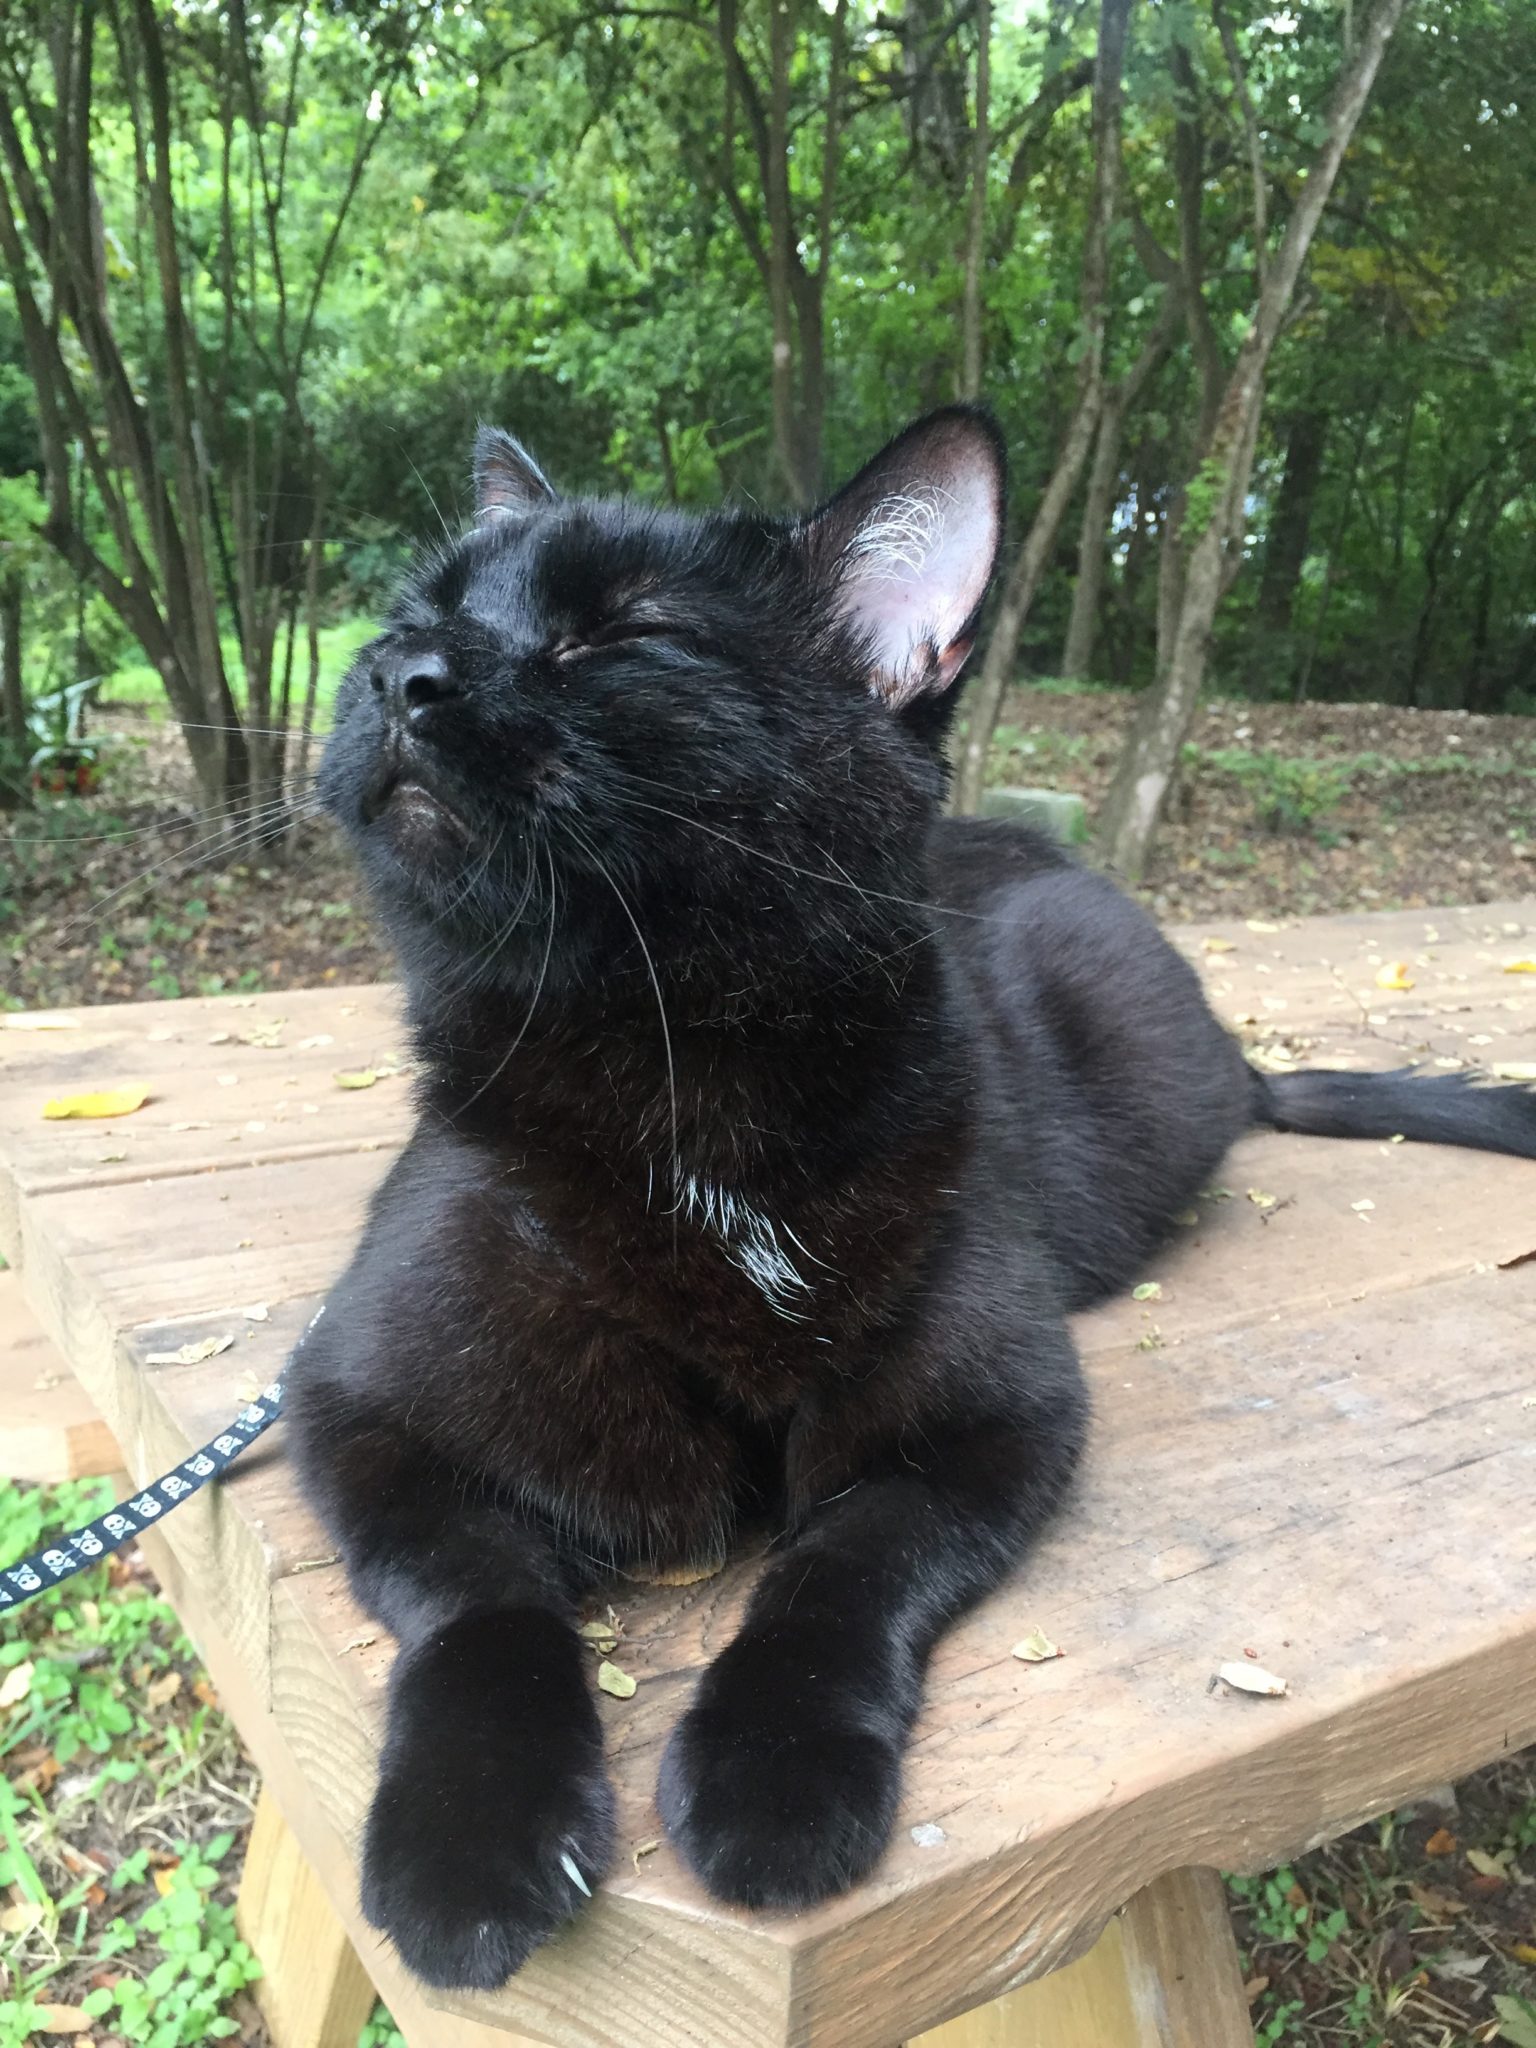 Figaro the cat sits on picnic table and sniffs fresh air